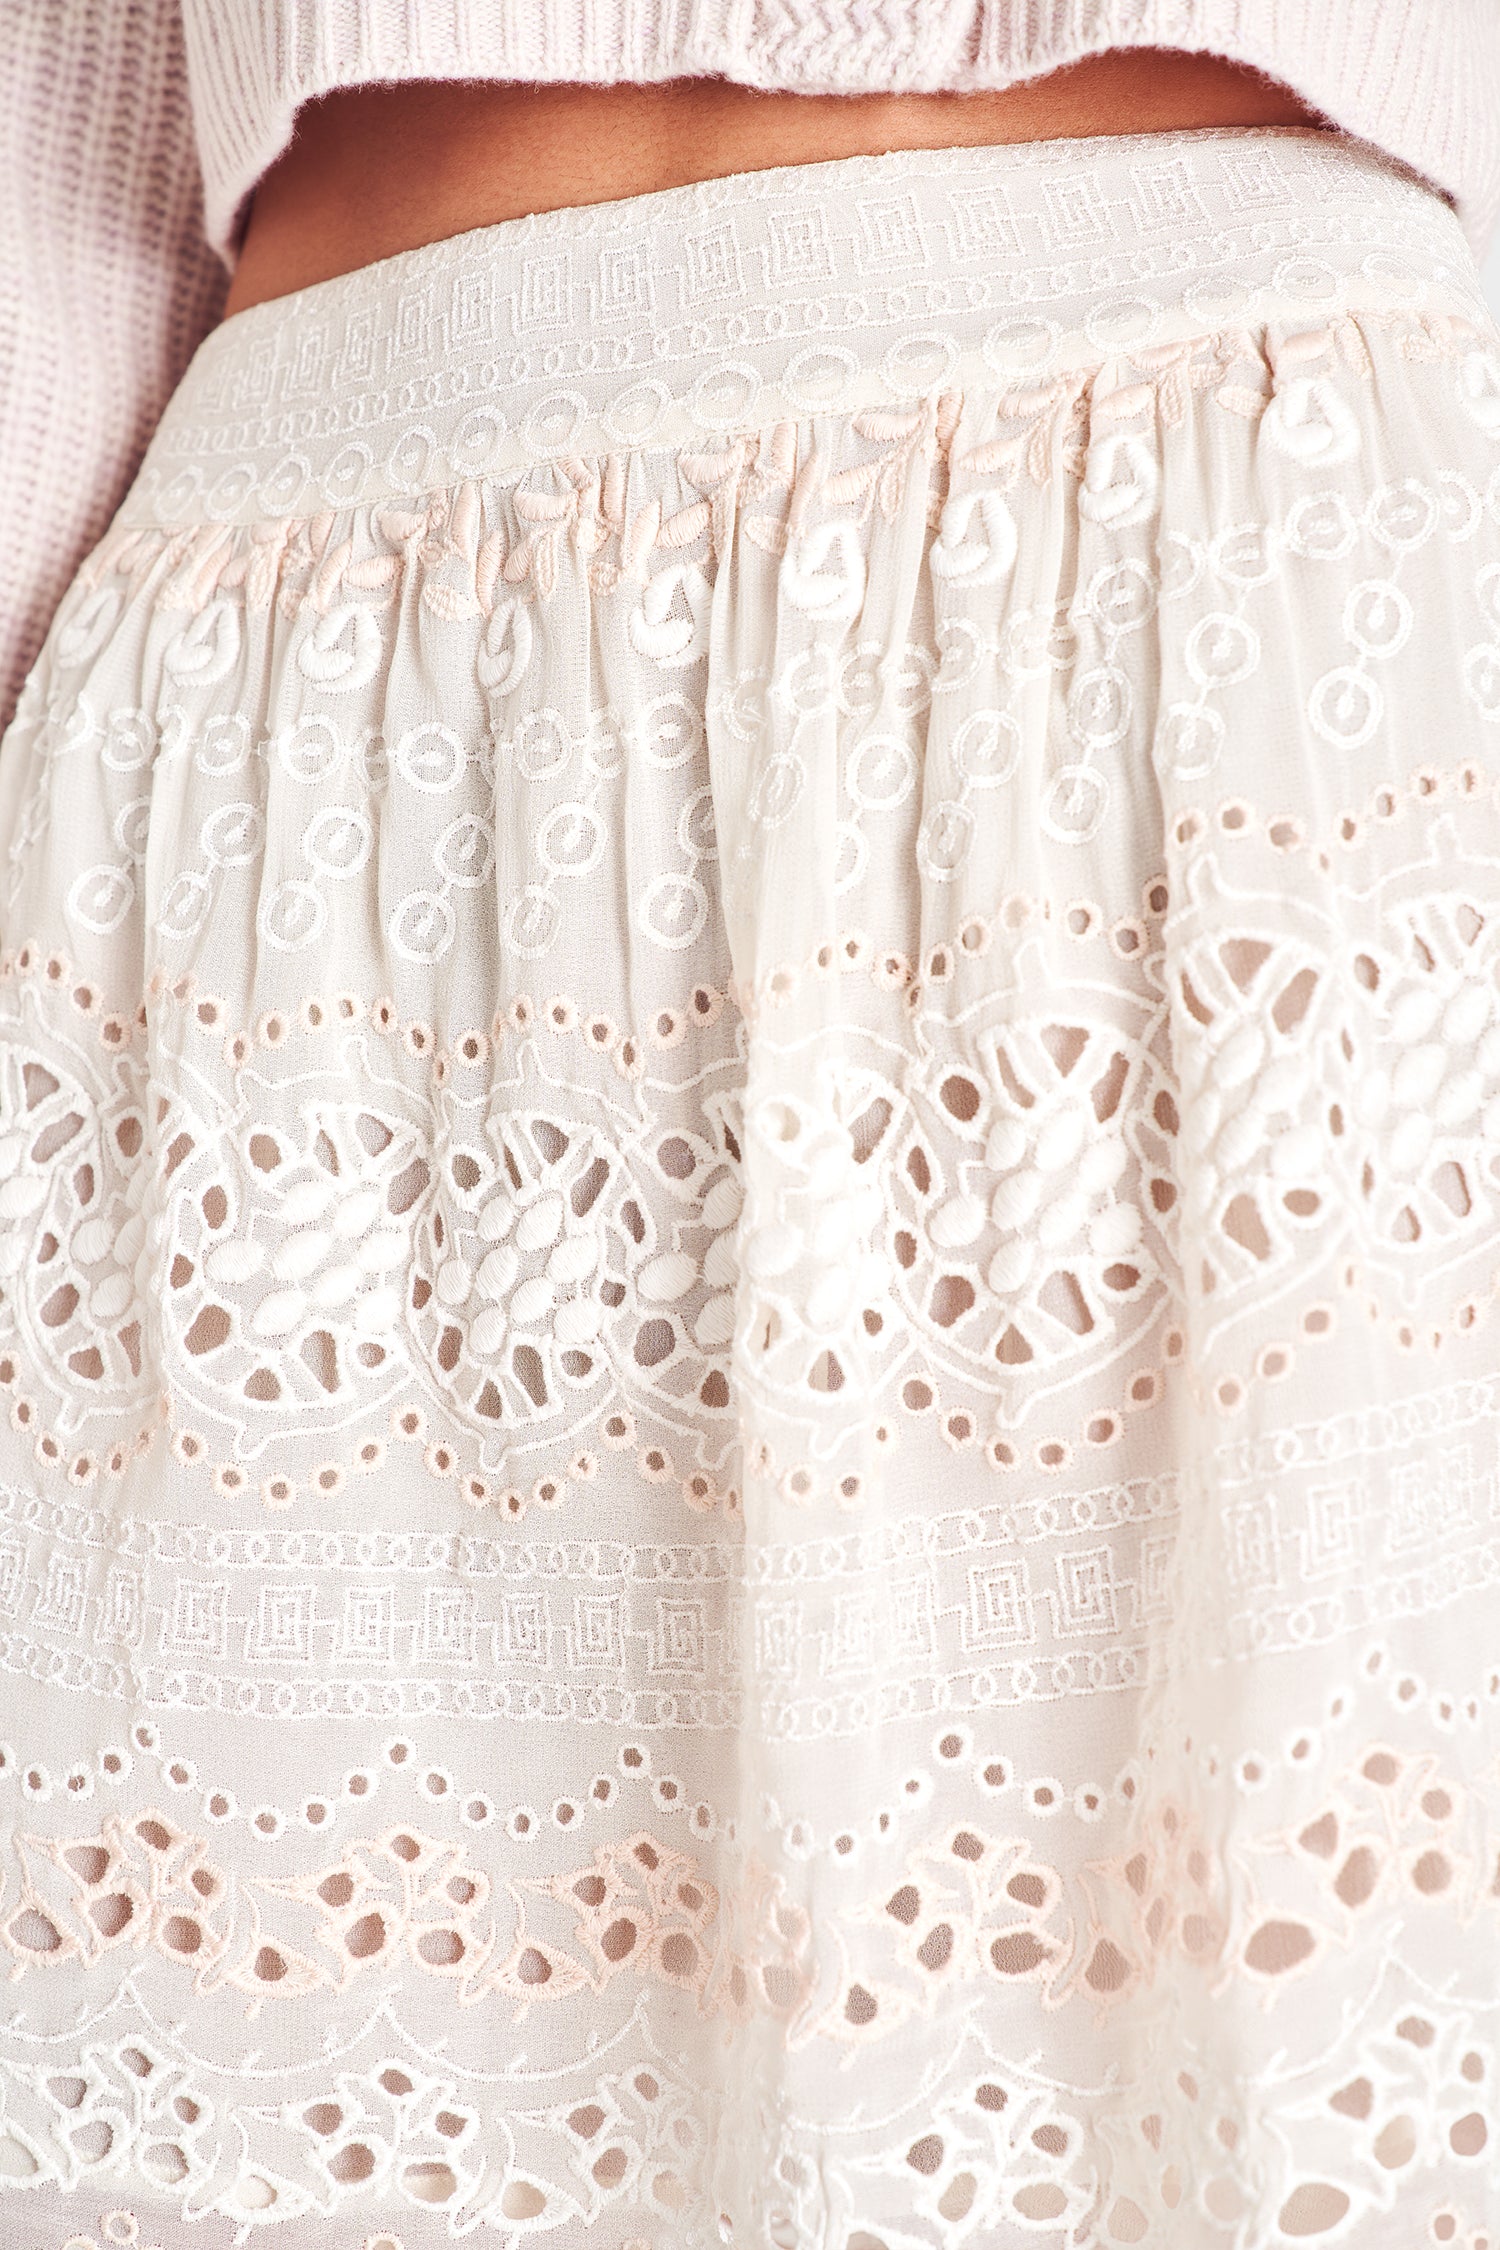 Cream mini skirt with eyelet and embroidery detailing, featuring an A-line hem.